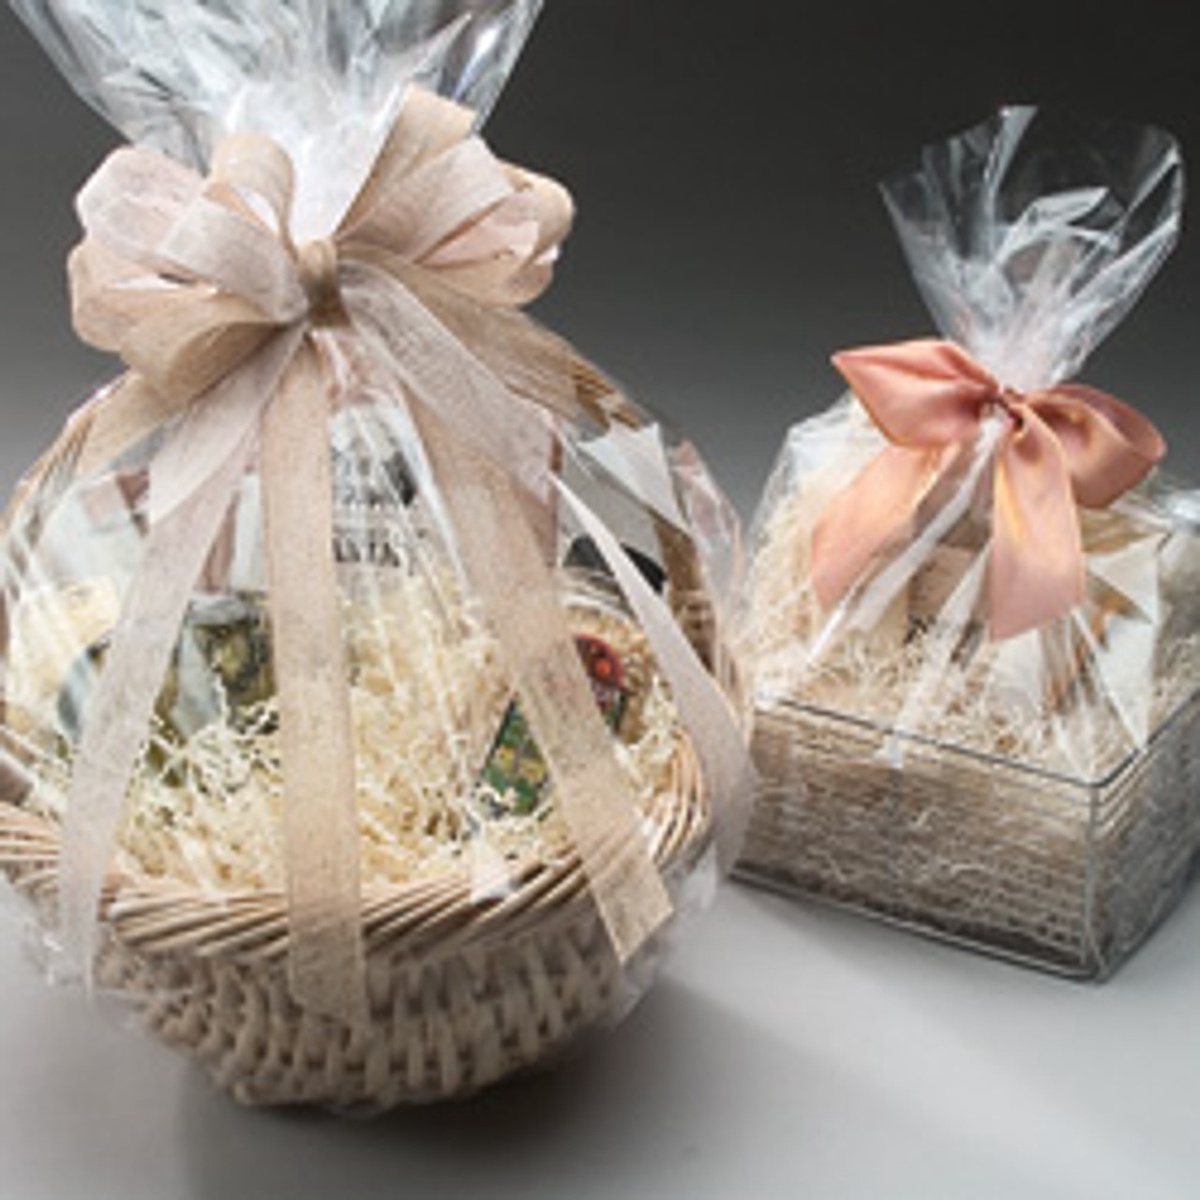 Food Gift Hampers: What Factors To Consider When Ordering Online?